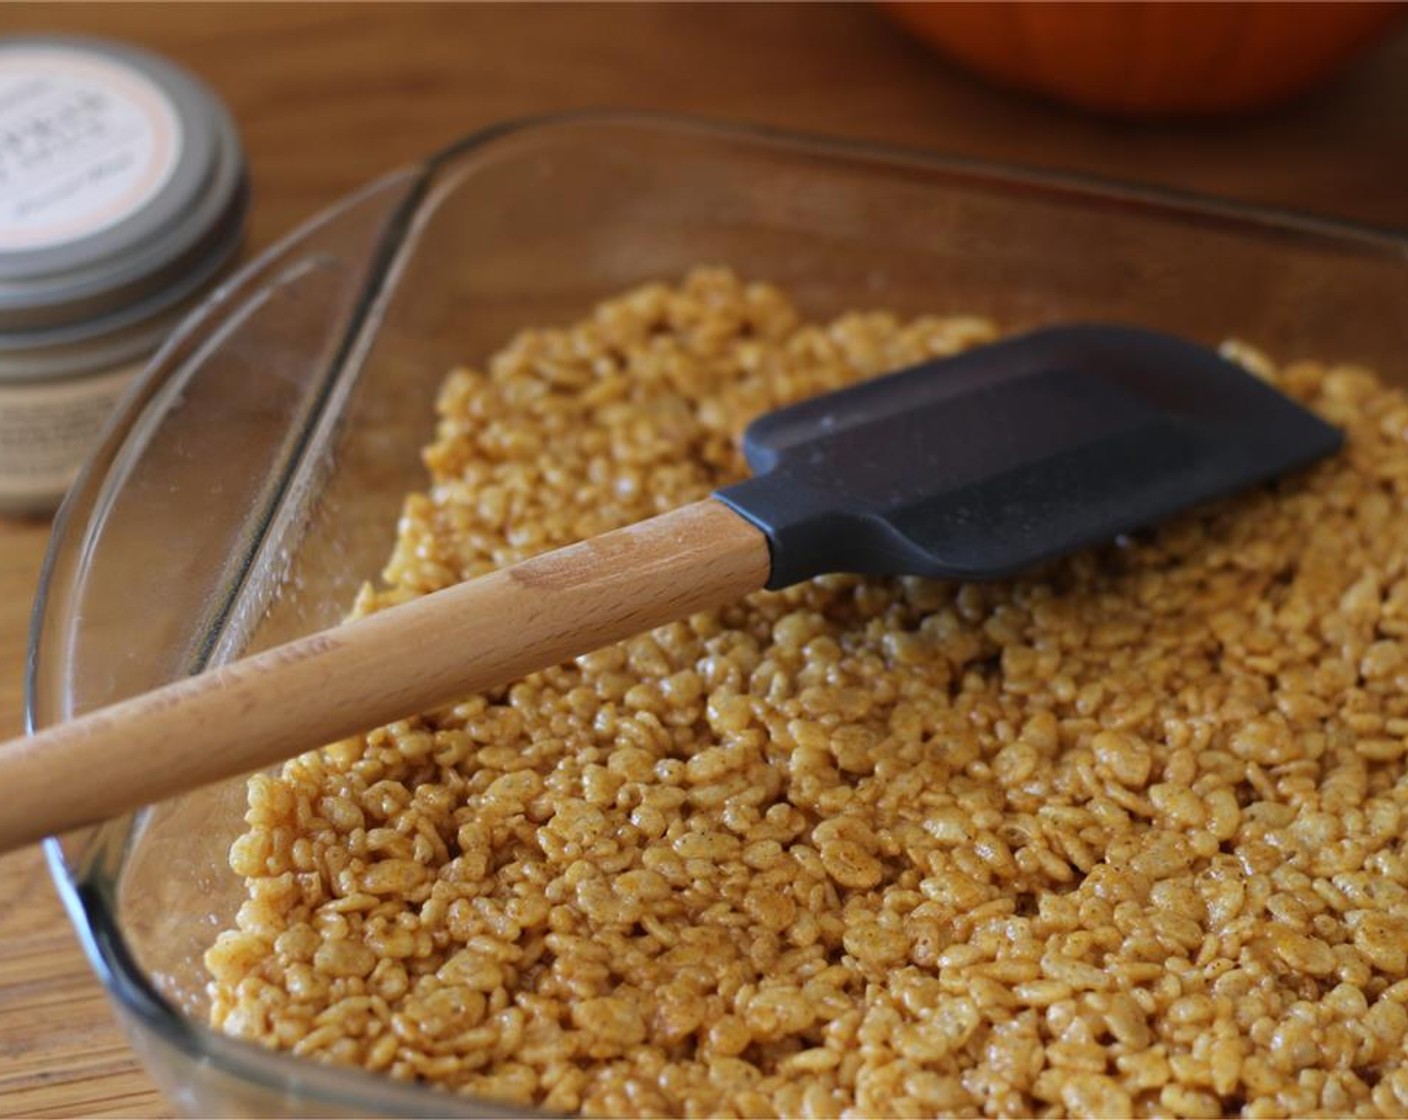 step 3 Stir in the Rice Krispies® Cereal (5 1/2 cups). Spray an 8x8 baking dish with nonstick spray. Spread the mixture into the dish and press gently with a greased spatula.